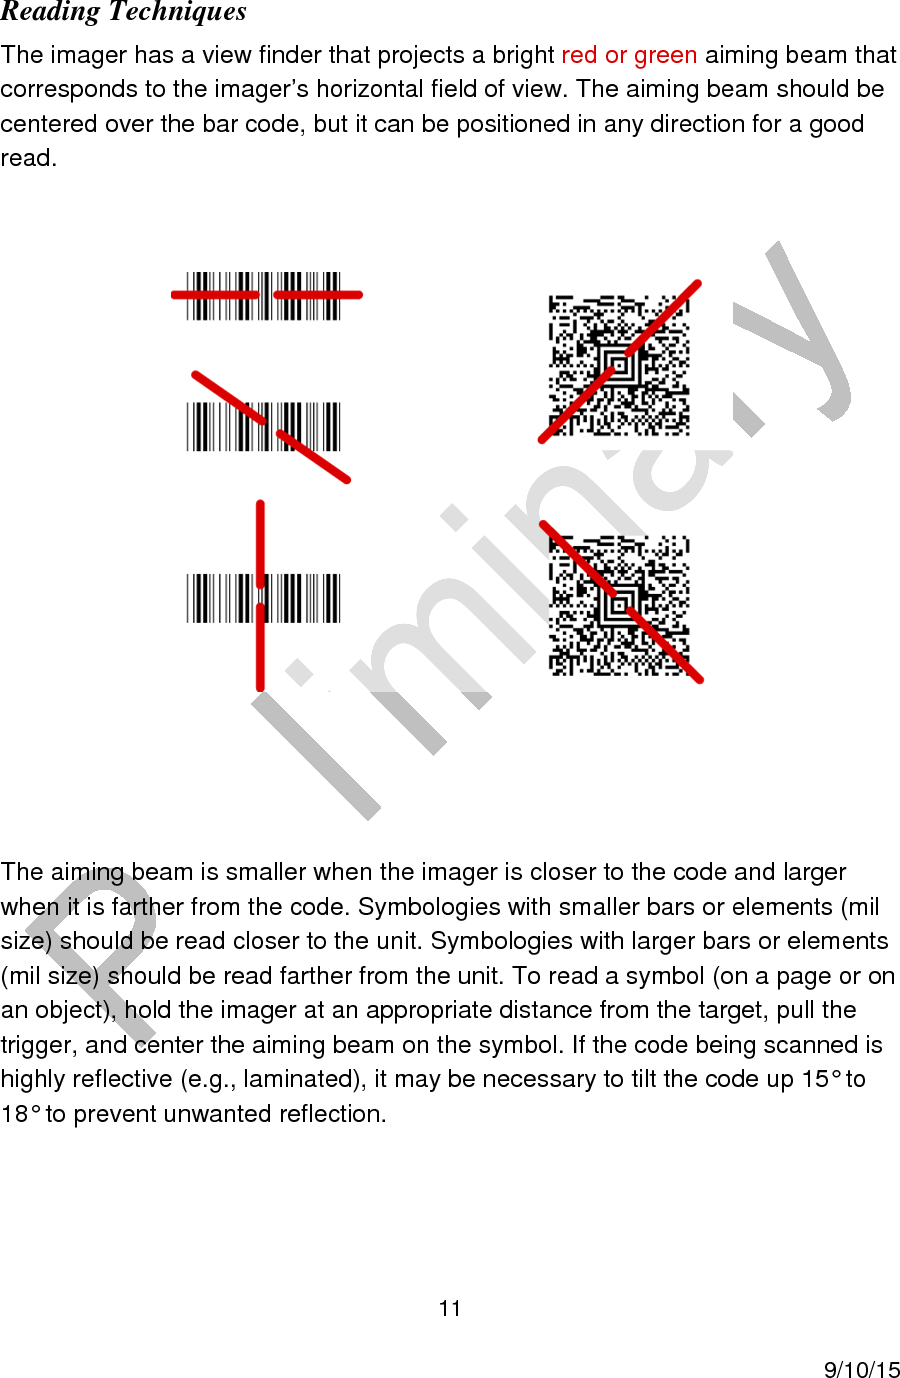  11     9/10/15 Reading Techniques The imager has a view finder that projects a bright red or green aiming beam that corresponds to the imager’s horizontal field of view. The aiming beam should be centered over the bar code, but it can be positioned in any direction for a good read.     The aiming beam is smaller when the imager is closer to the code and larger when it is farther from the code. Symbologies with smaller bars or elements (mil size) should be read closer to the unit. Symbologies with larger bars or elements (mil size) should be read farther from the unit. To read a symbol (on a page or on an object), hold the imager at an appropriate distance from the target, pull the trigger, and center the aiming beam on the symbol. If the code being scanned is highly reflective (e.g., laminated), it may be necessary to tilt the code up 15° to 18° to prevent unwanted reflection.   